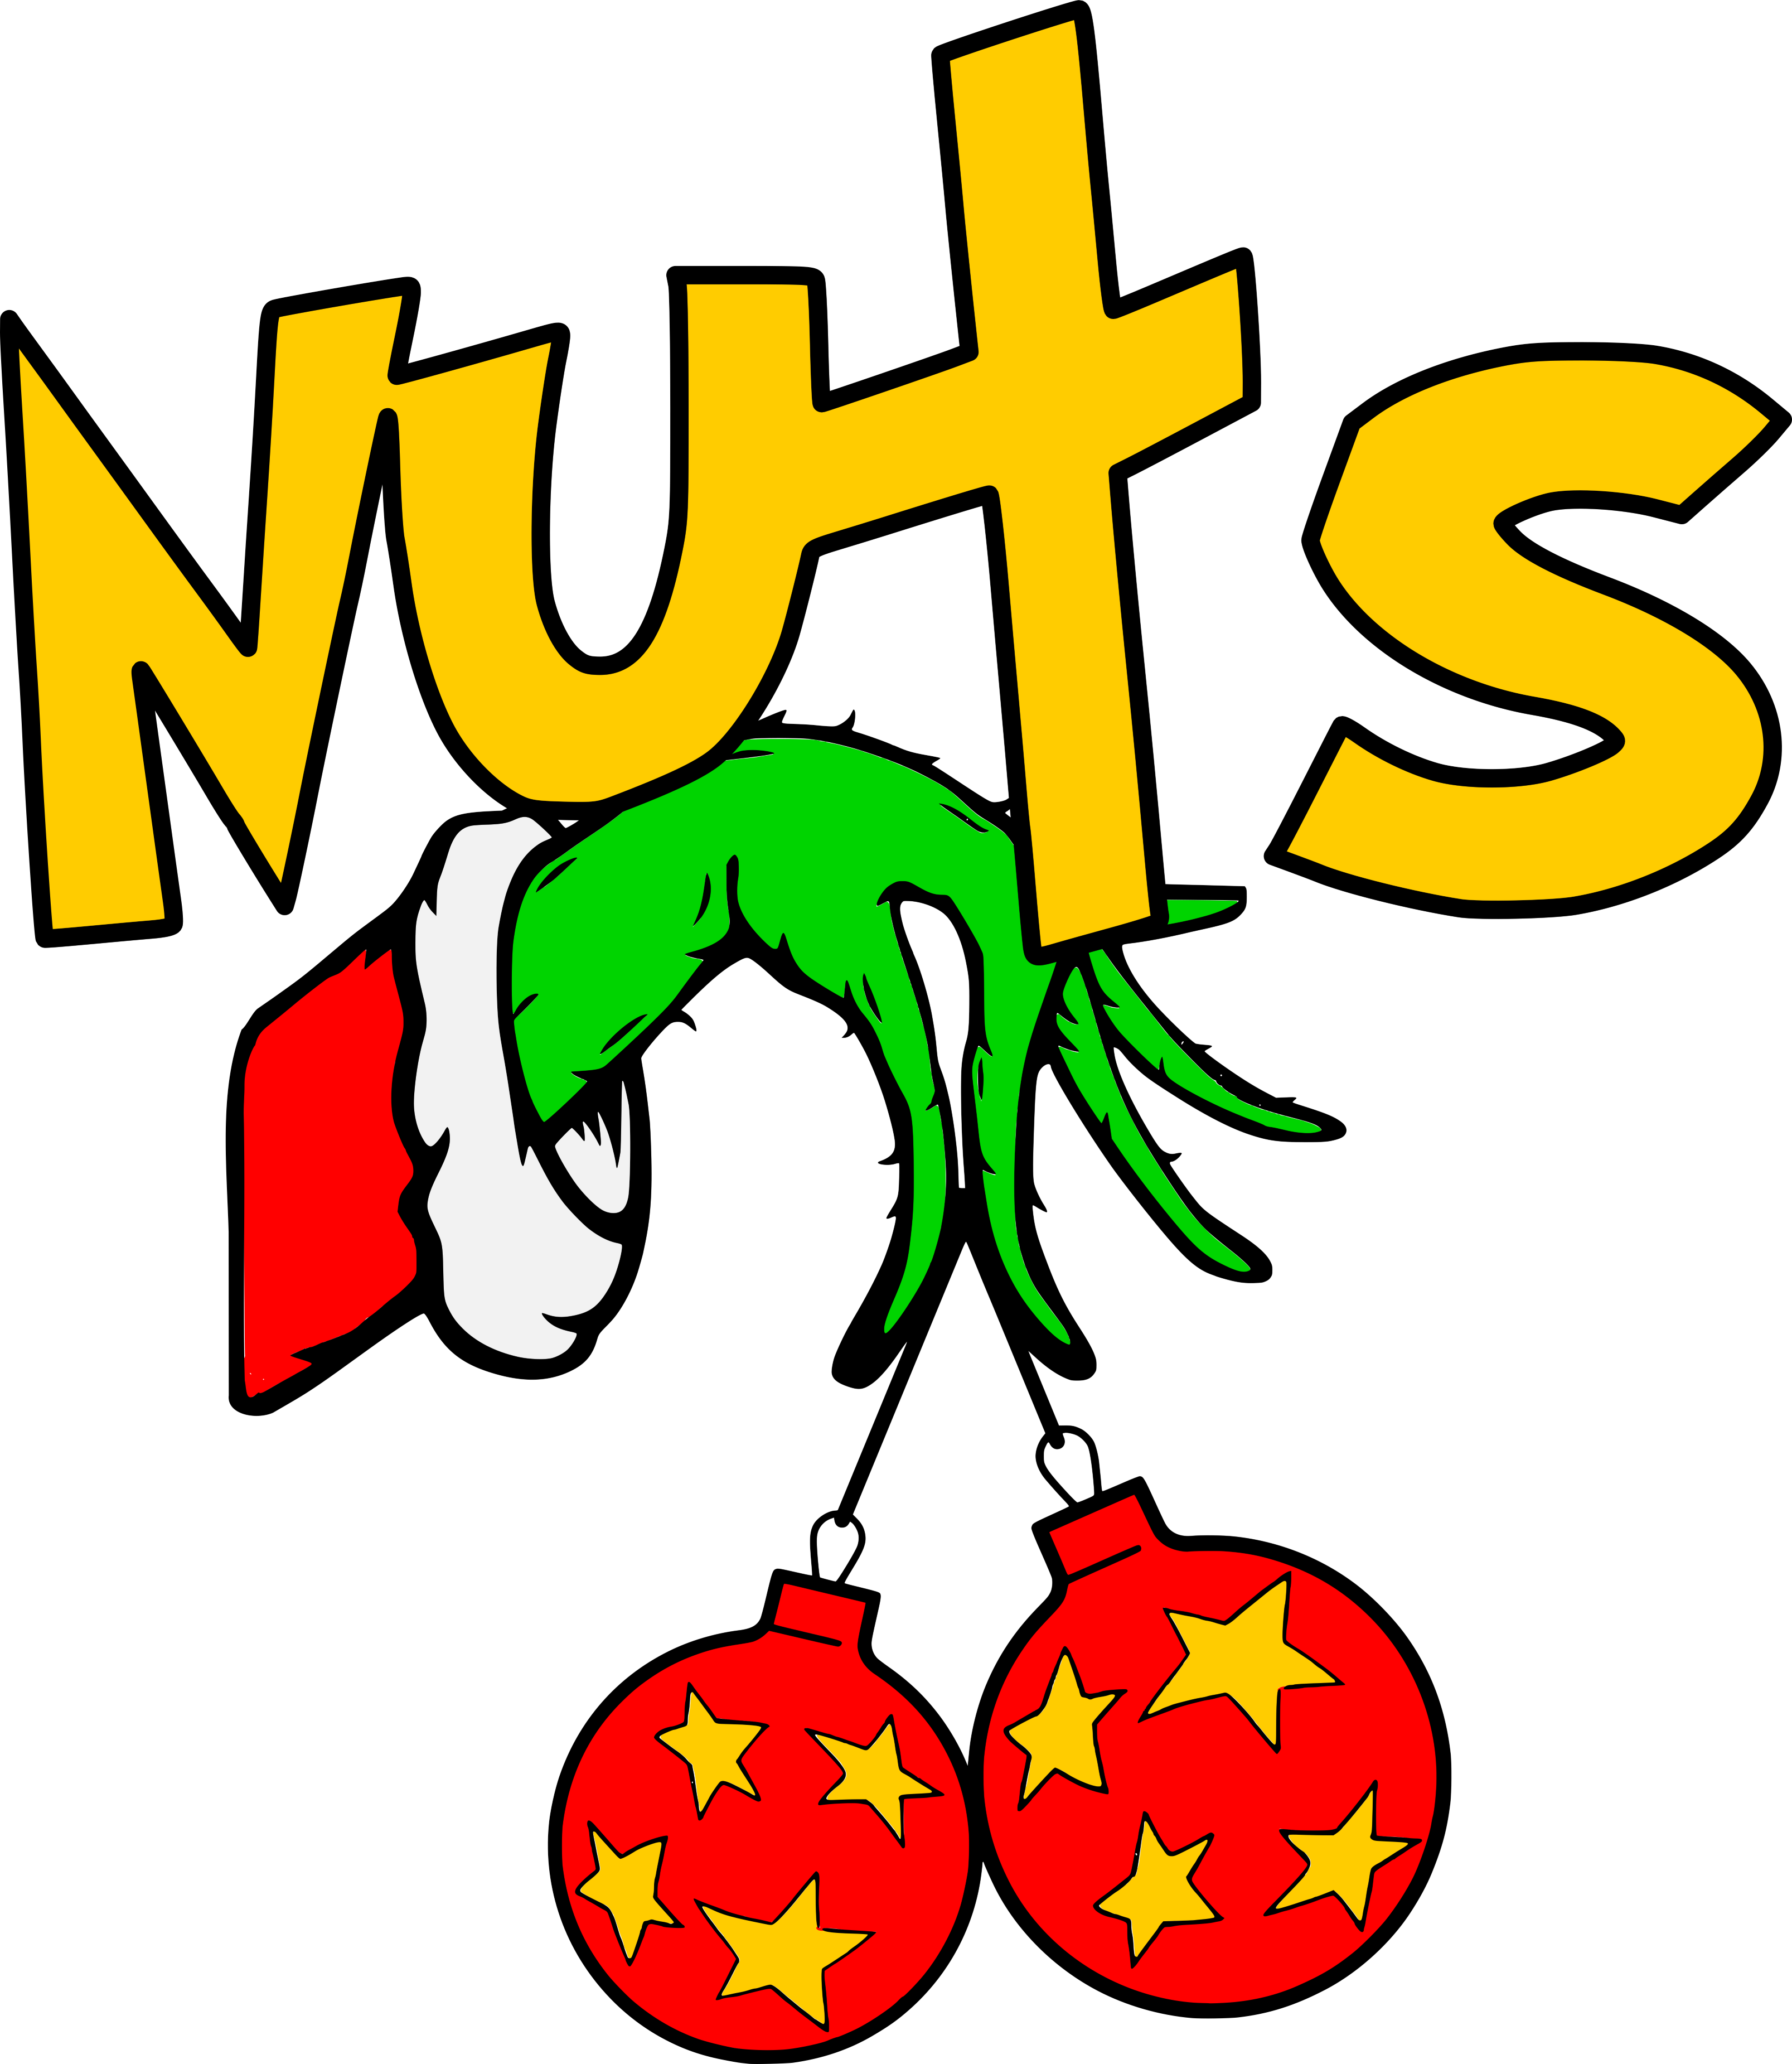 Nuts(one part of the pair) Christmas Print Scorpio 65 Designs